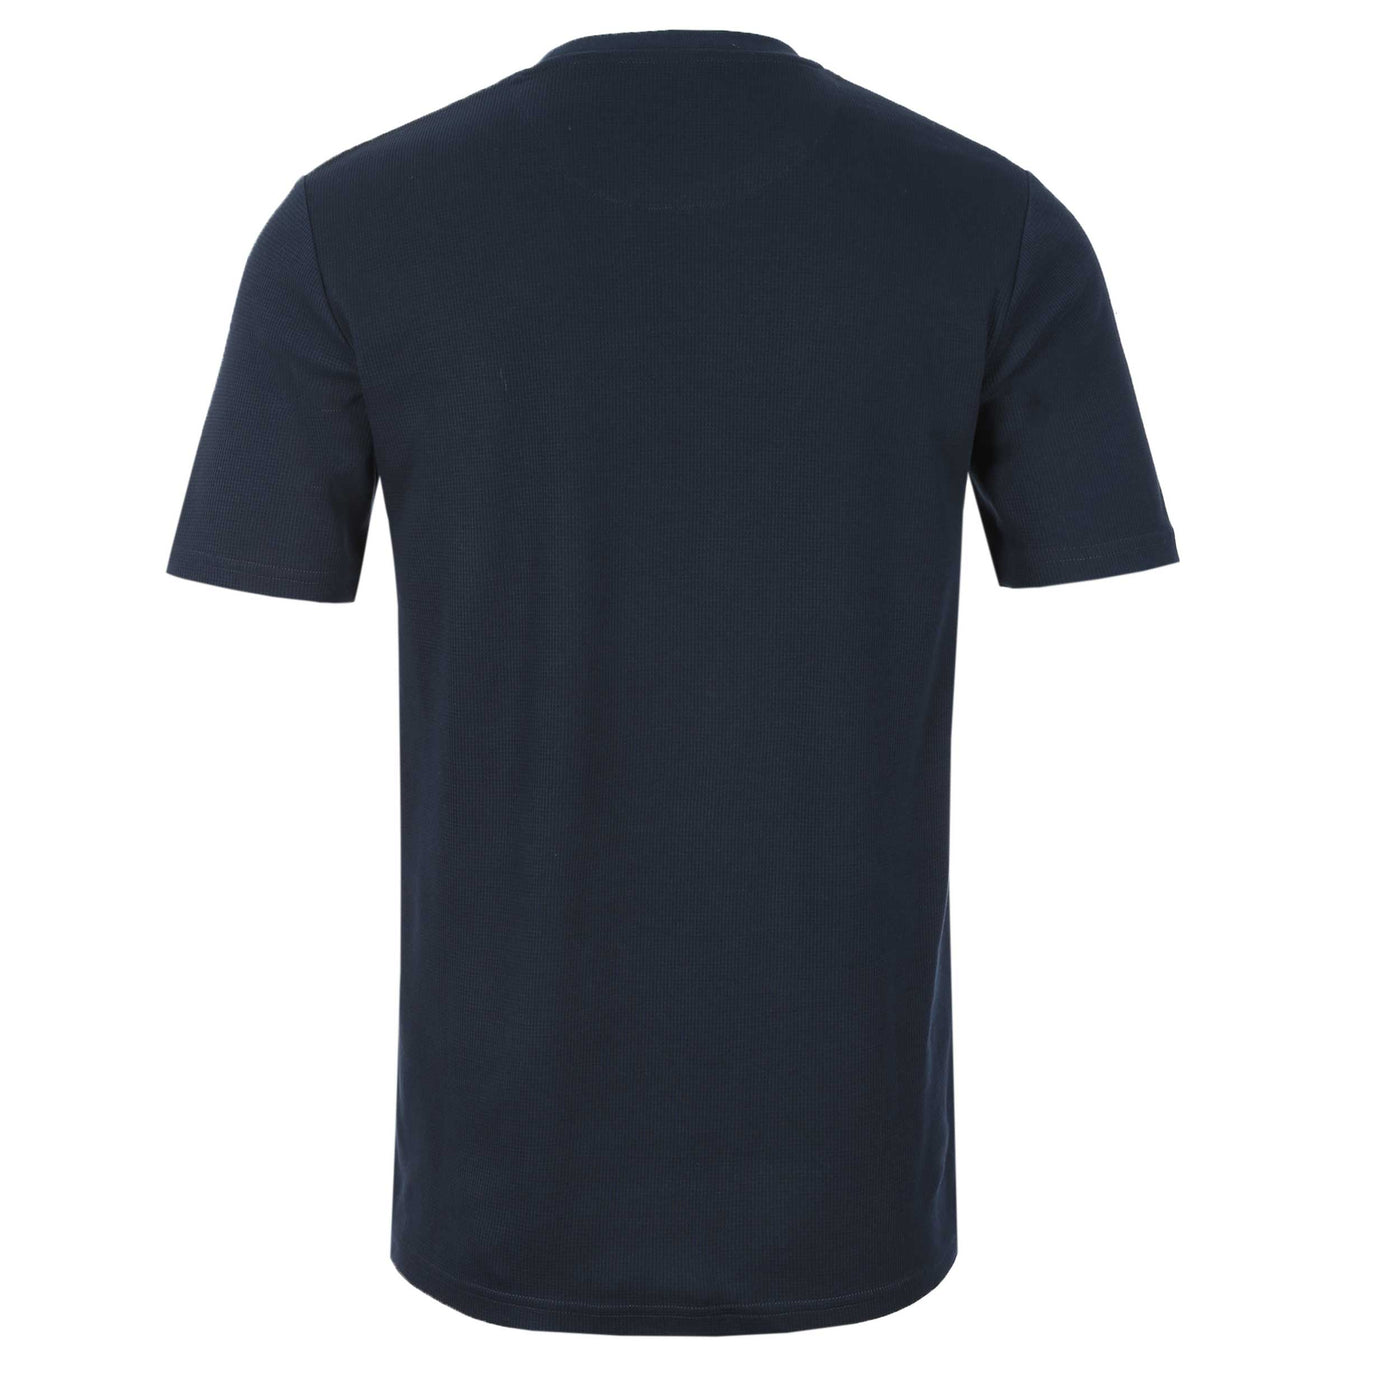 Oliver Sweeney Malin T Shirt in Navy Back